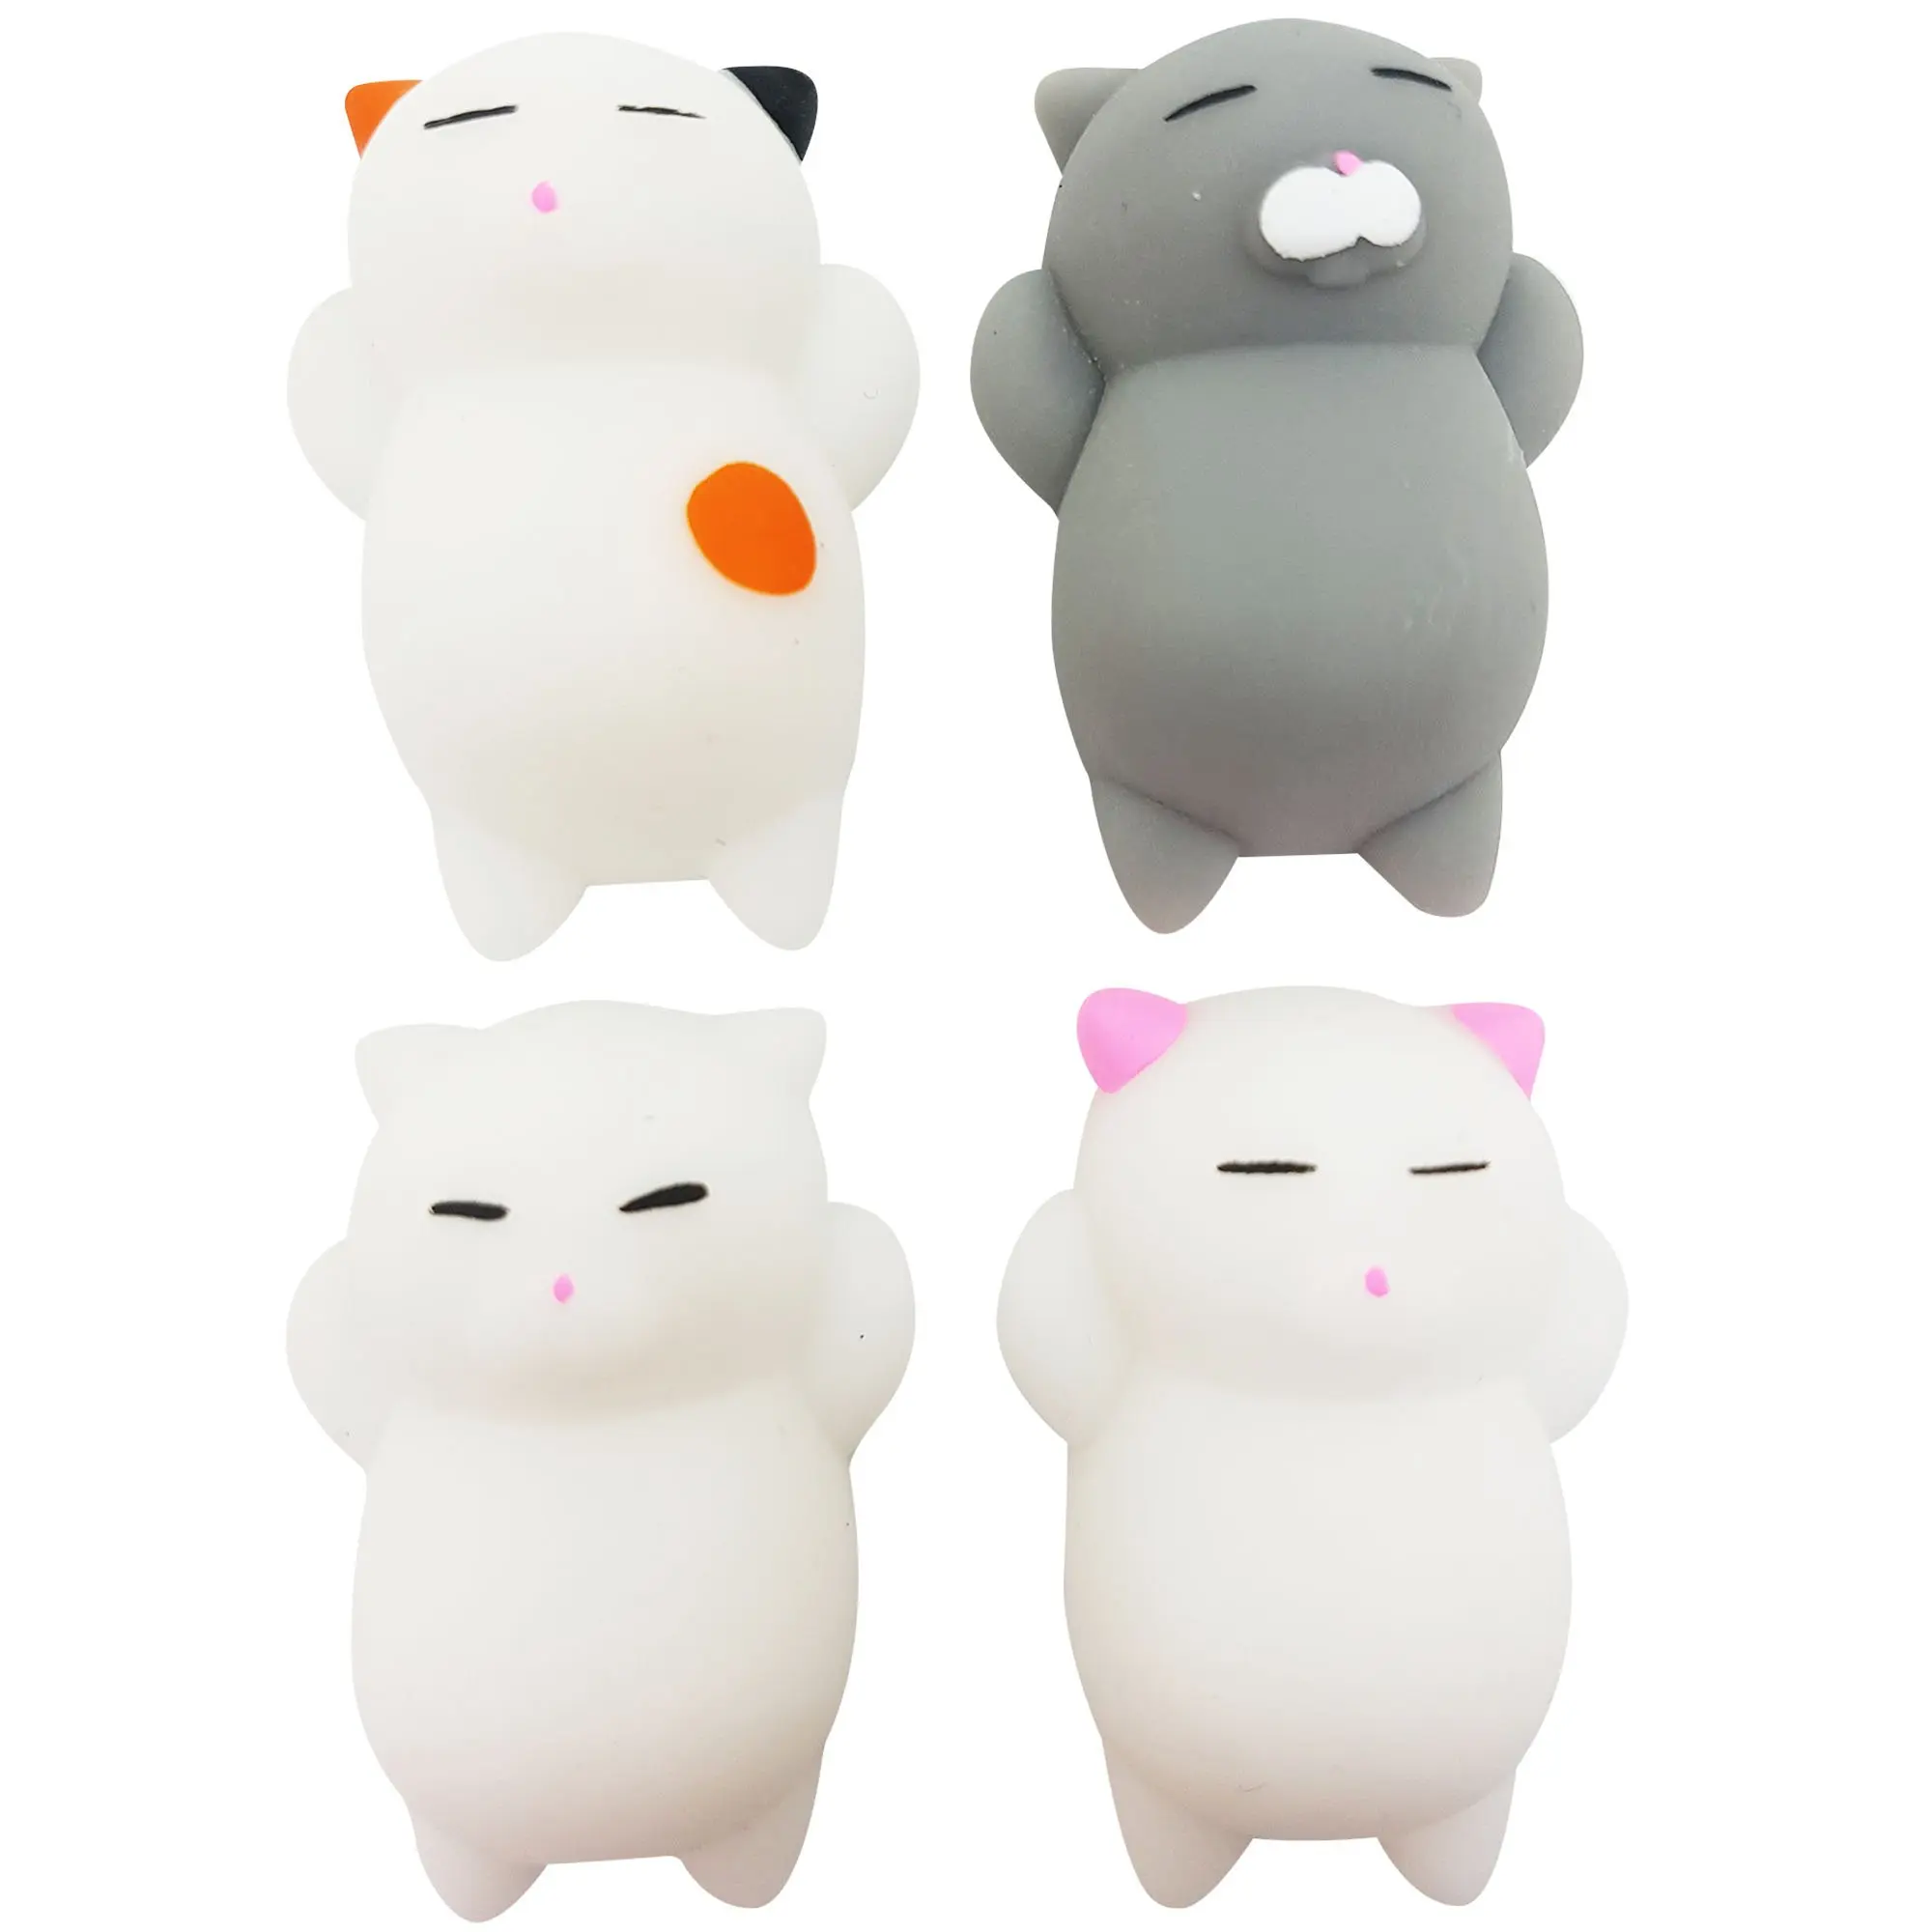 Buy Critters Mochi Squishy Cat Toys Incredibly Cute And Small Kawaii